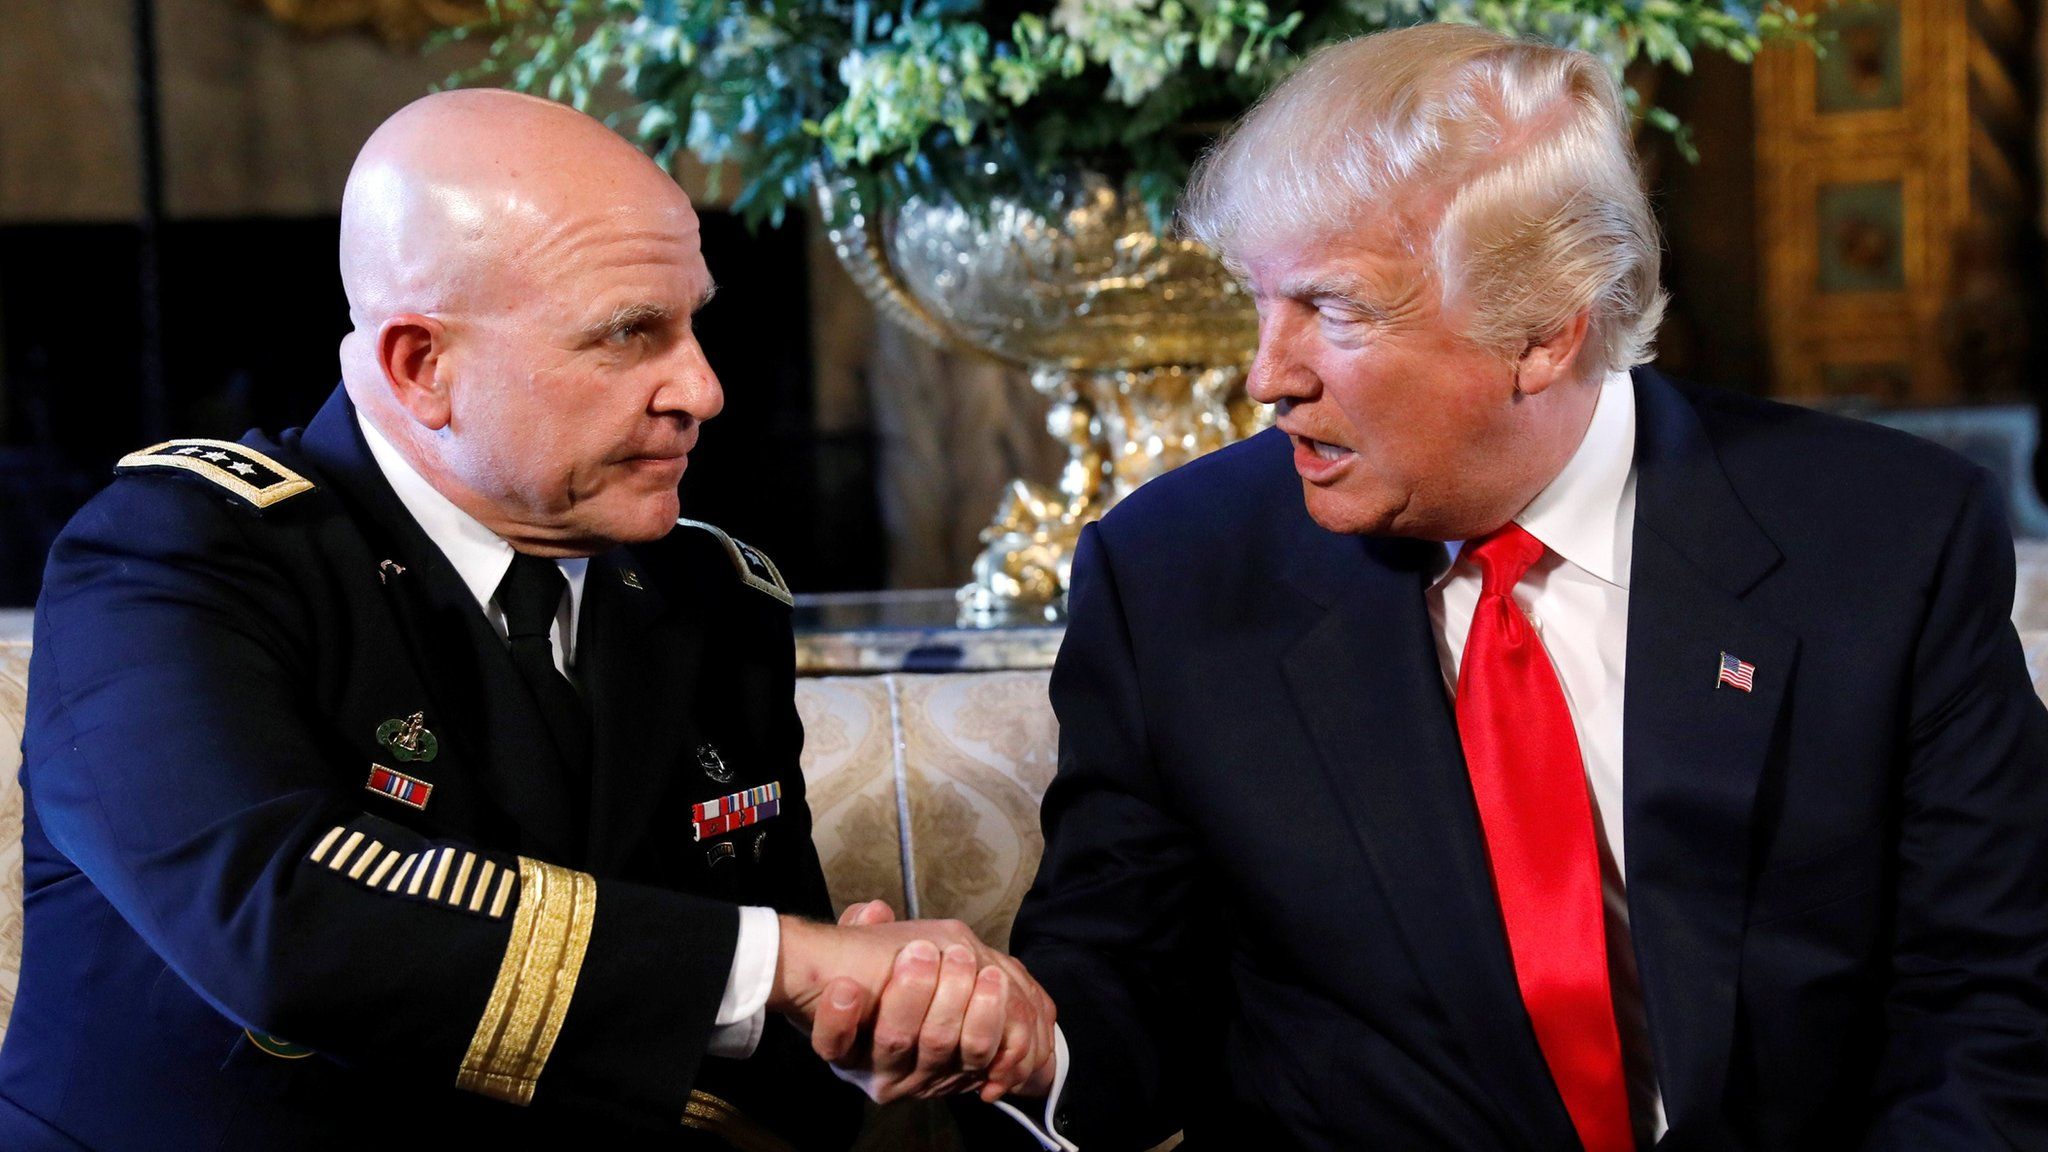 HR McMaster with Donald Trump on 20 February 2017